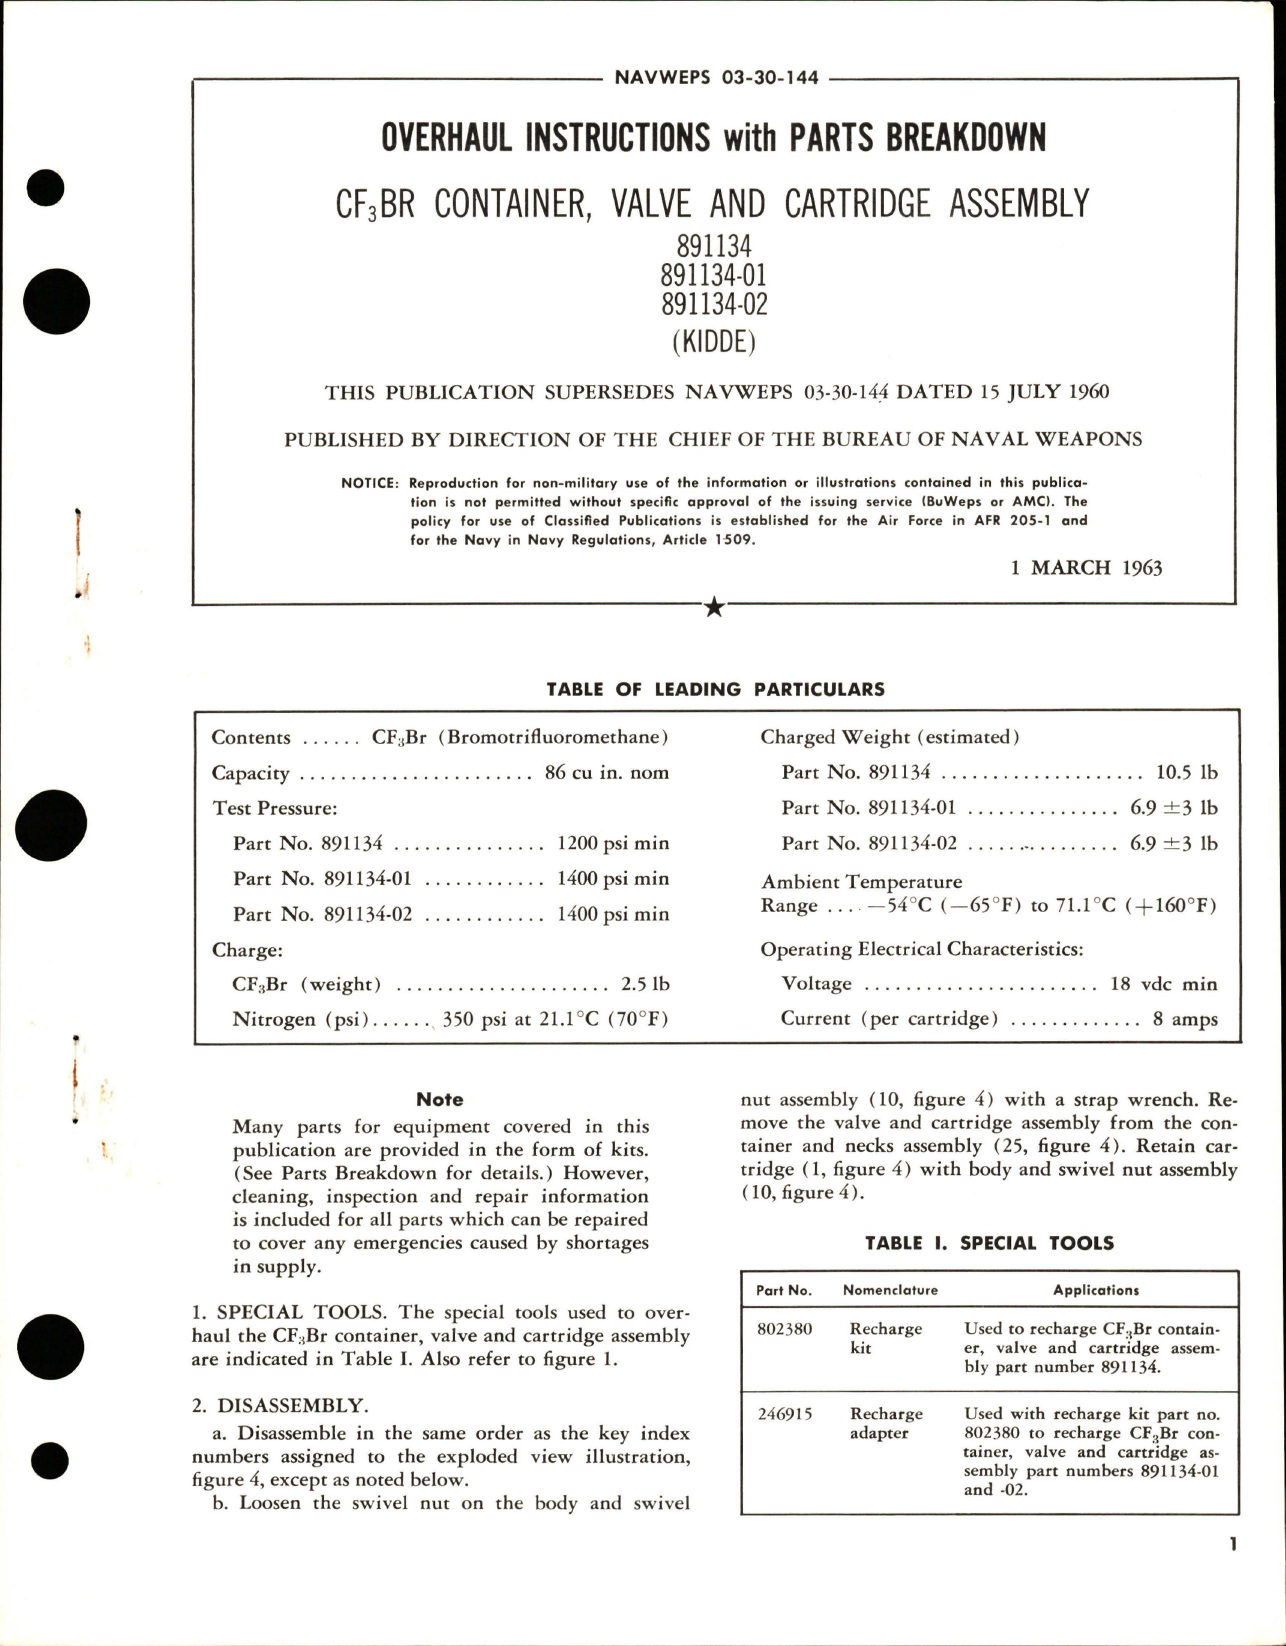 Sample page 1 from AirCorps Library document: Overhaul Instructions with Parts Breakdown for CF3BR Container, Valve and Cartridge Assembly - 891134, 891134-01, and 891134-02